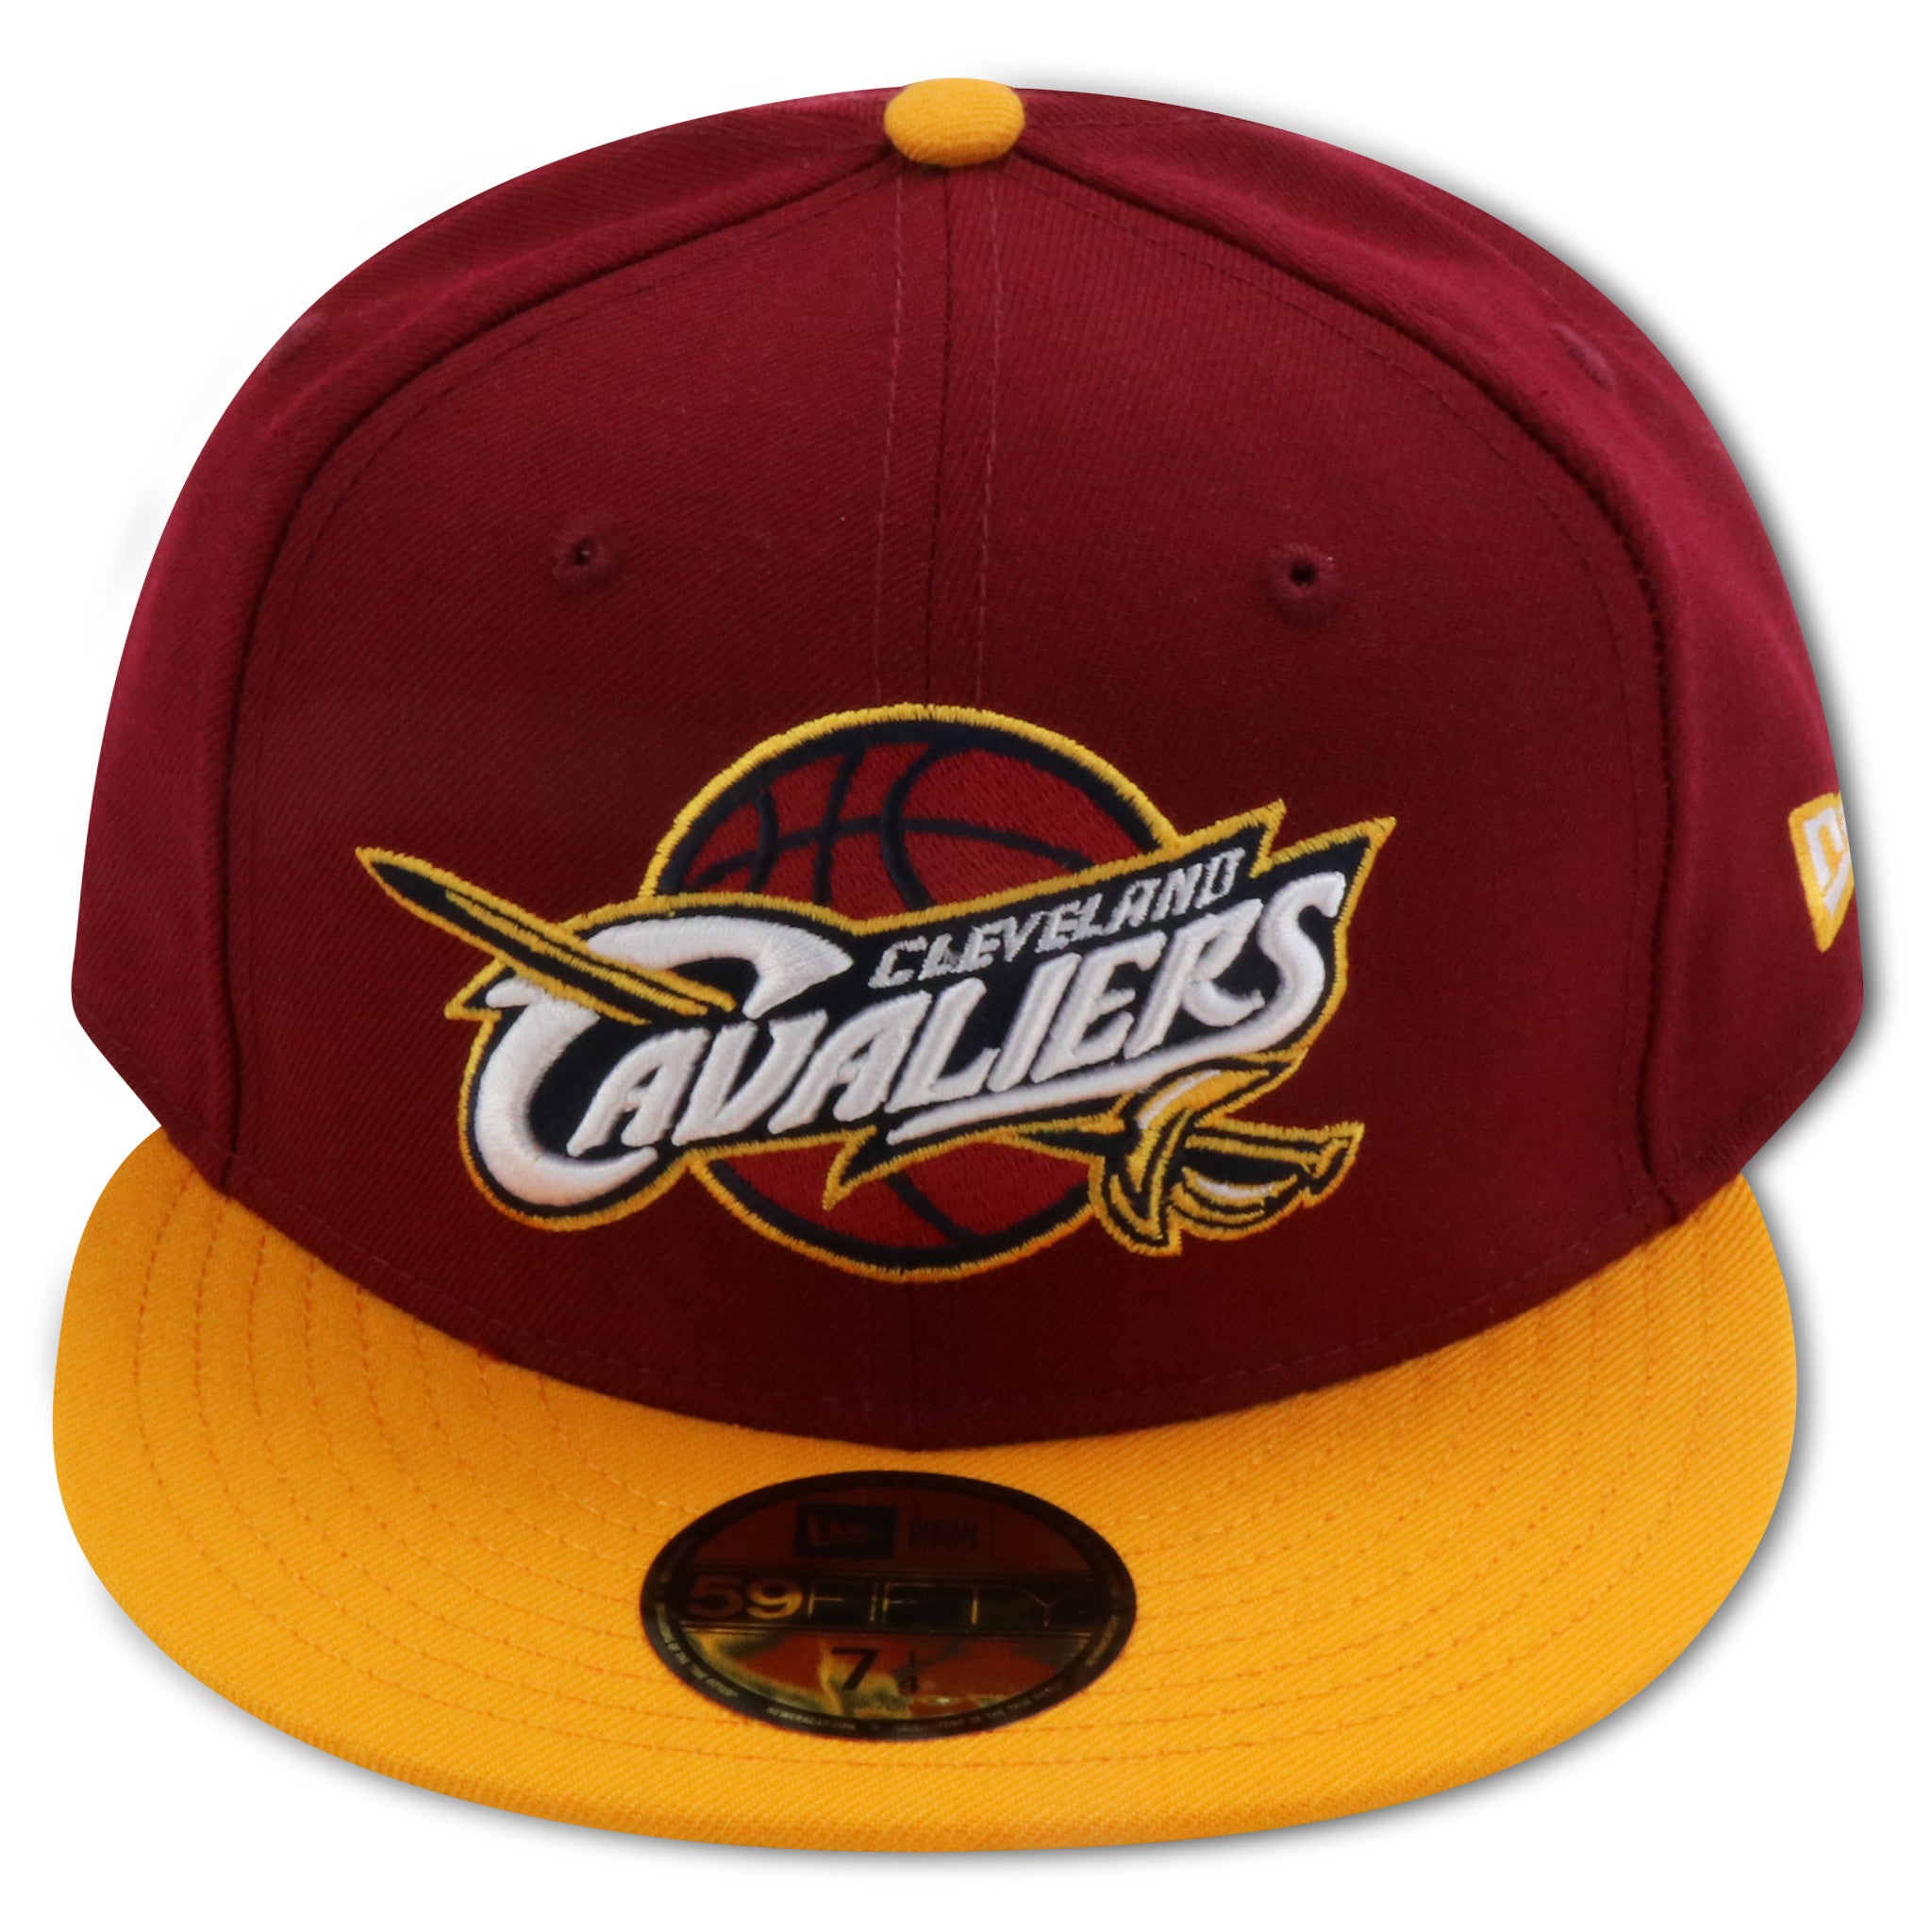 CLEVELAND CAVALIERS NEW ERA 59FIFTY FITTED